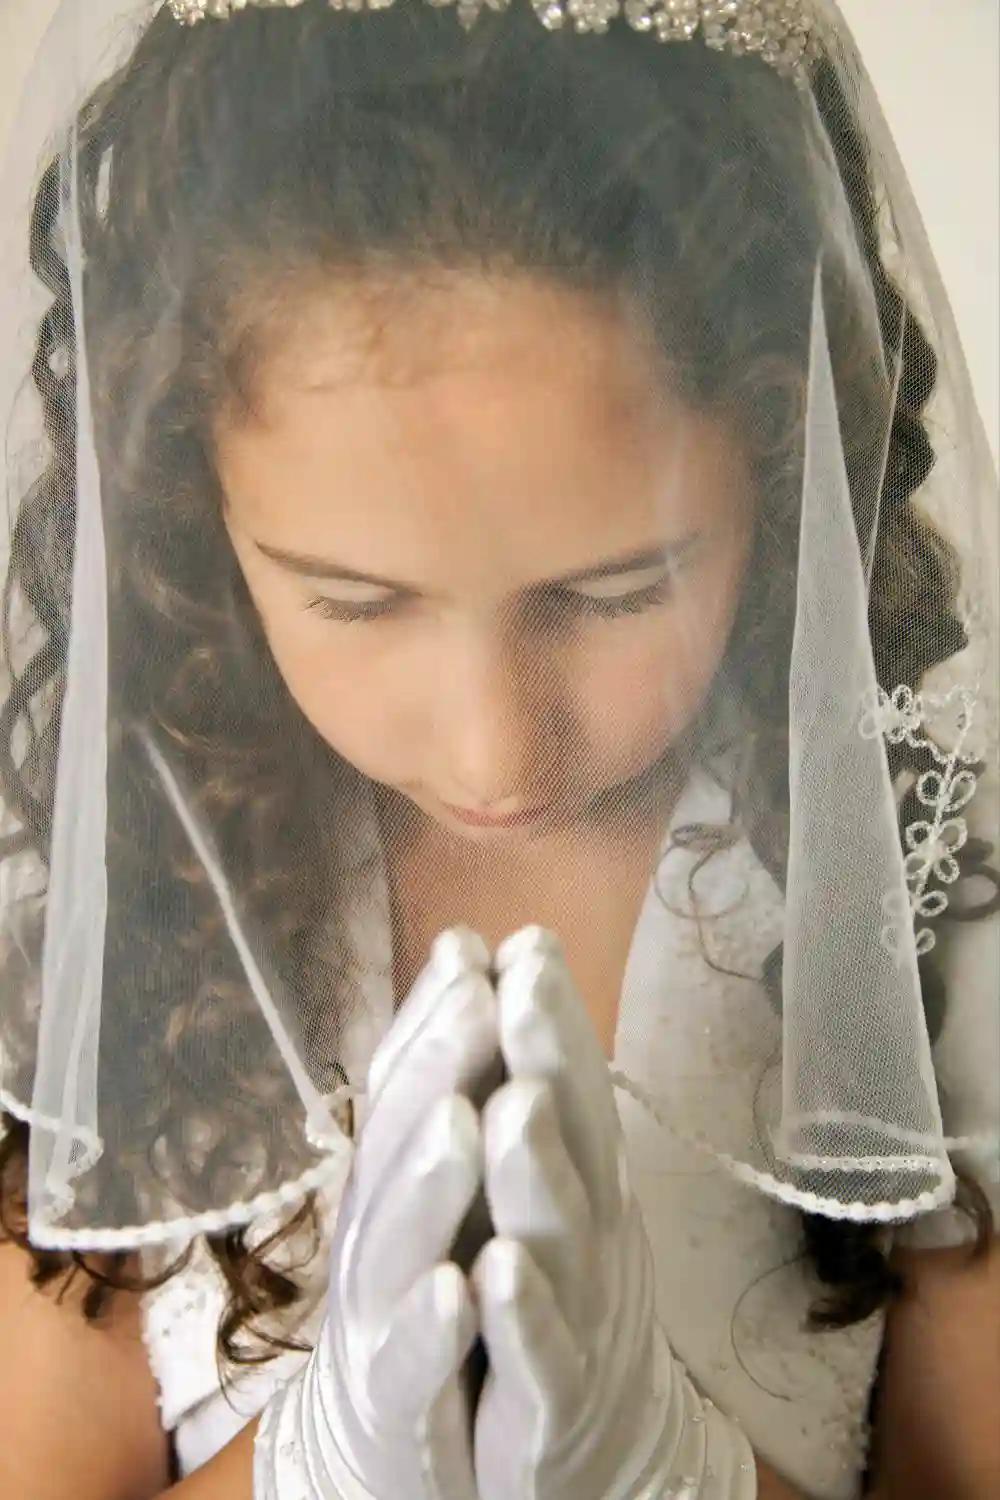 Girl praying for First Communion